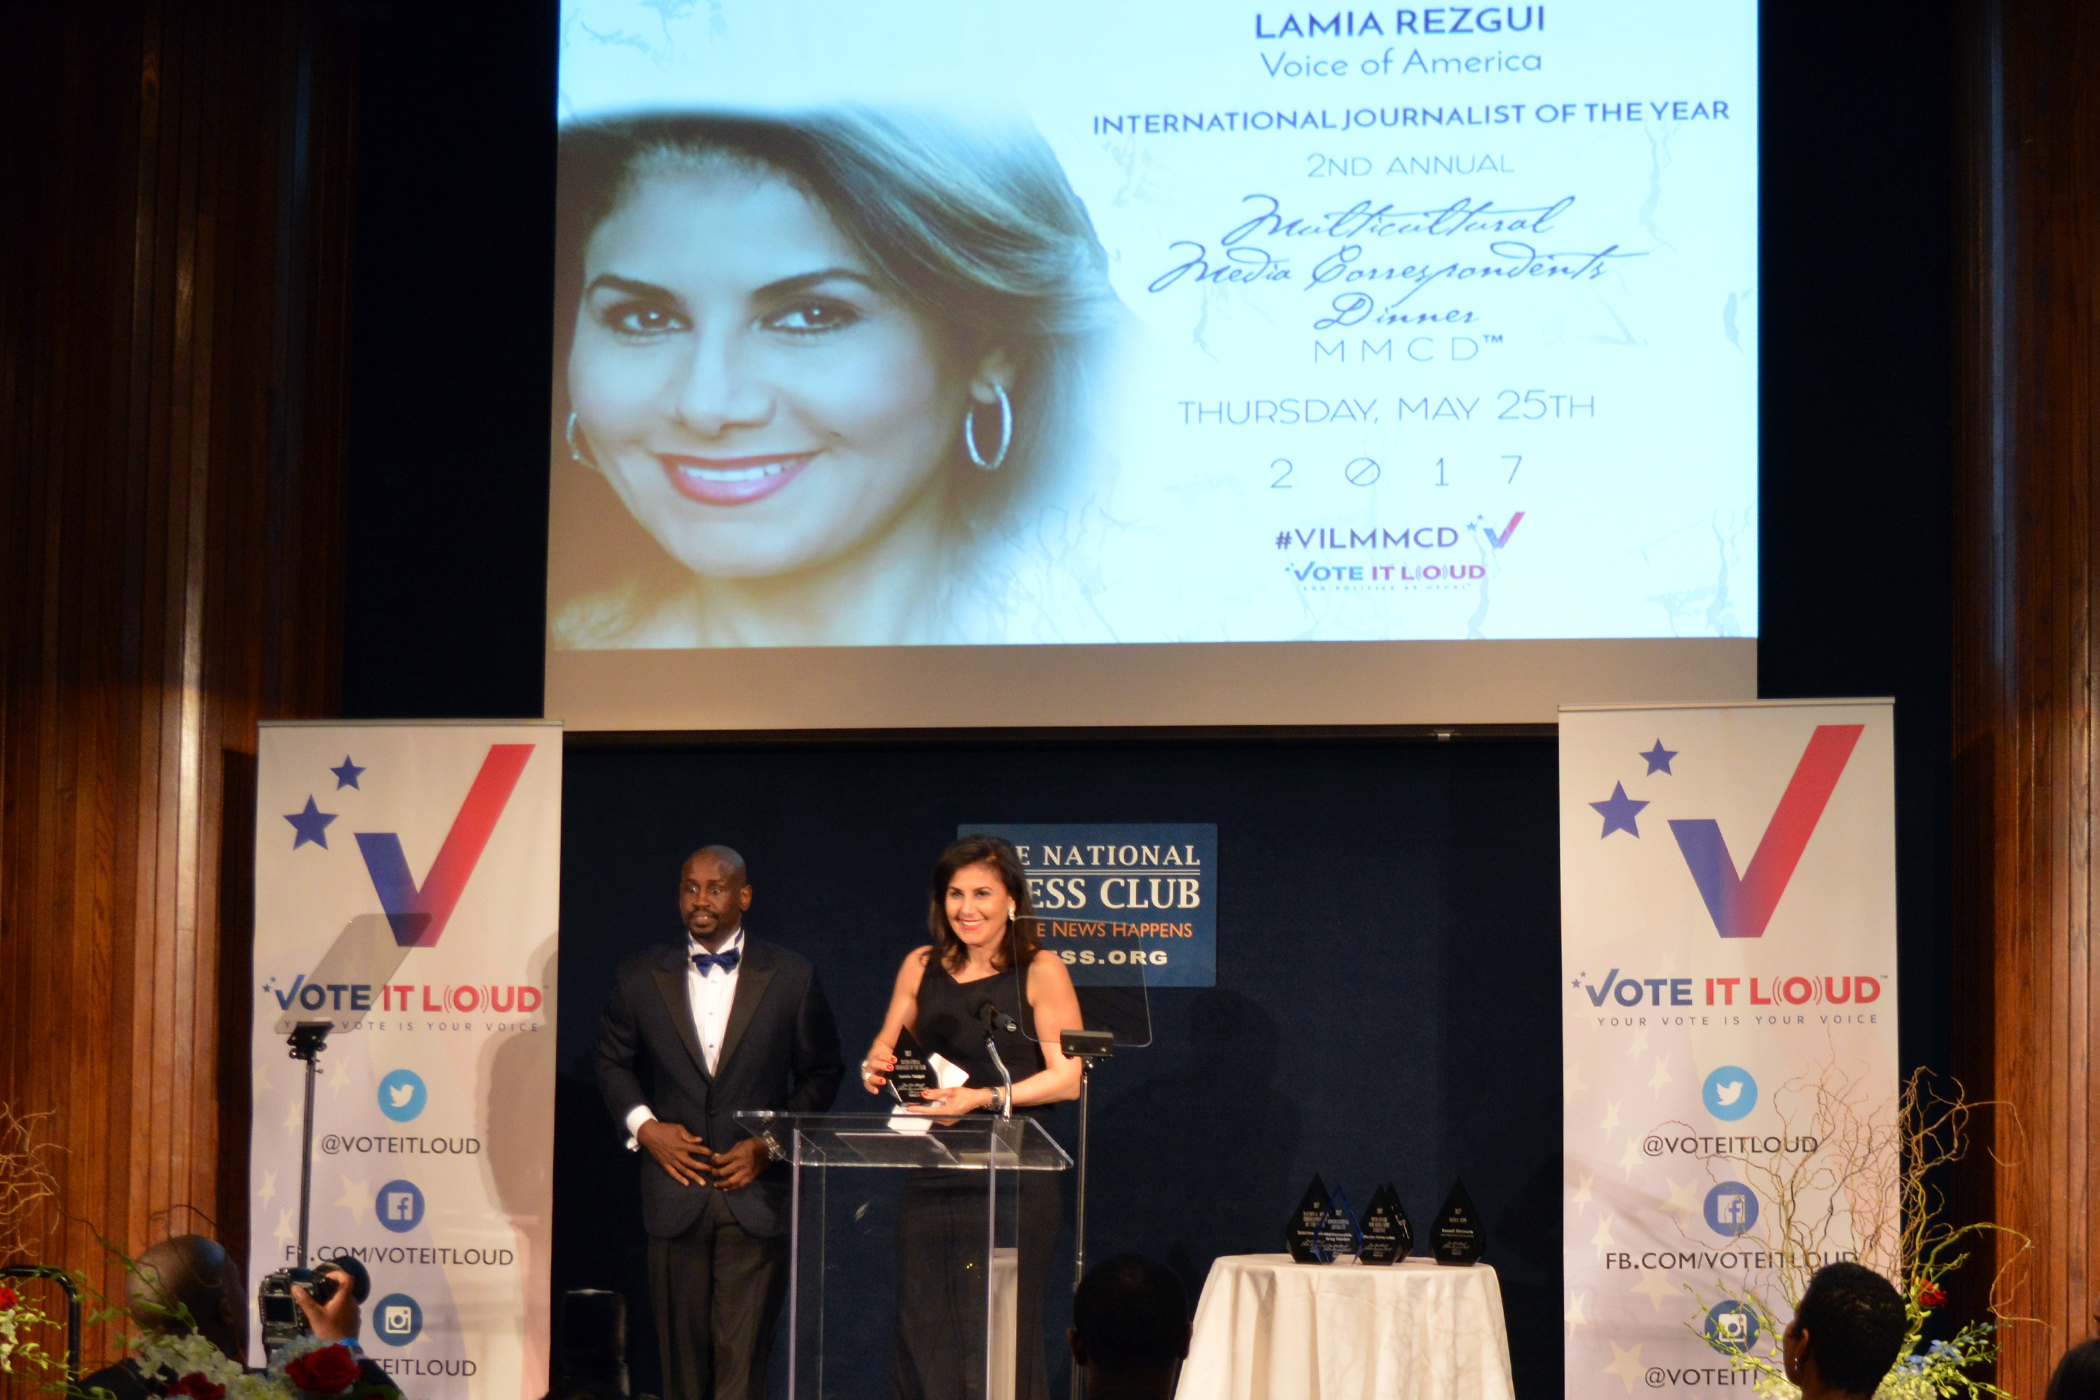 Radio Sawa correspondent honored at the Multicultural Correspondents Dinner